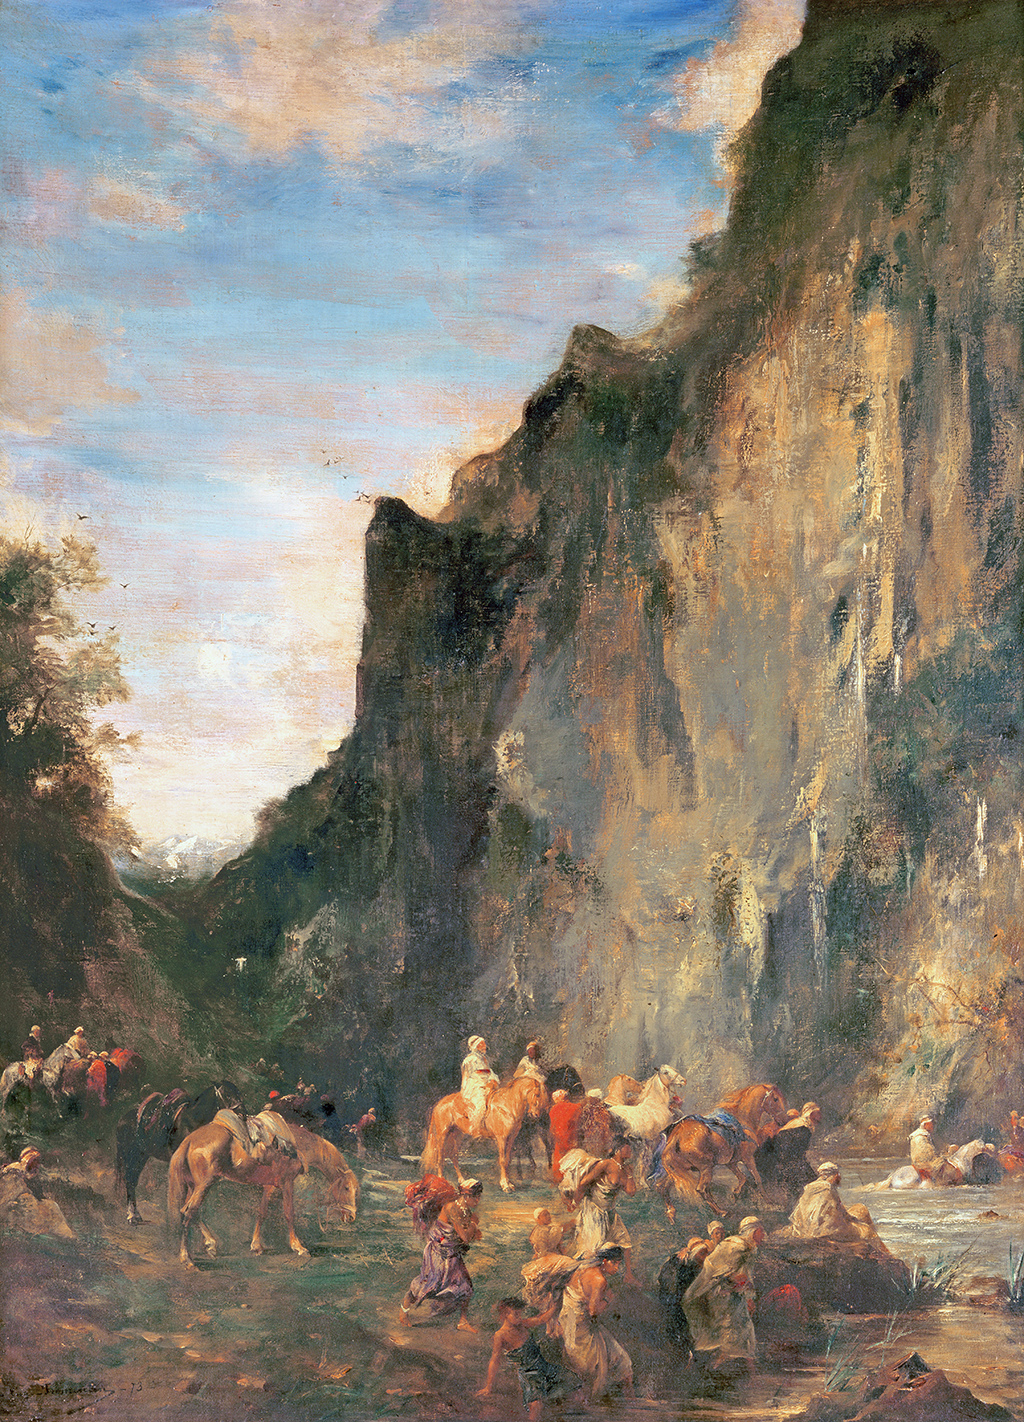 A group of travelers crossing over a stream of water. The women accompanying them carry large bags of cloth on their backs and direct the young children. The men sit on horses watching over the crossing. To the right is a large rock cliff.